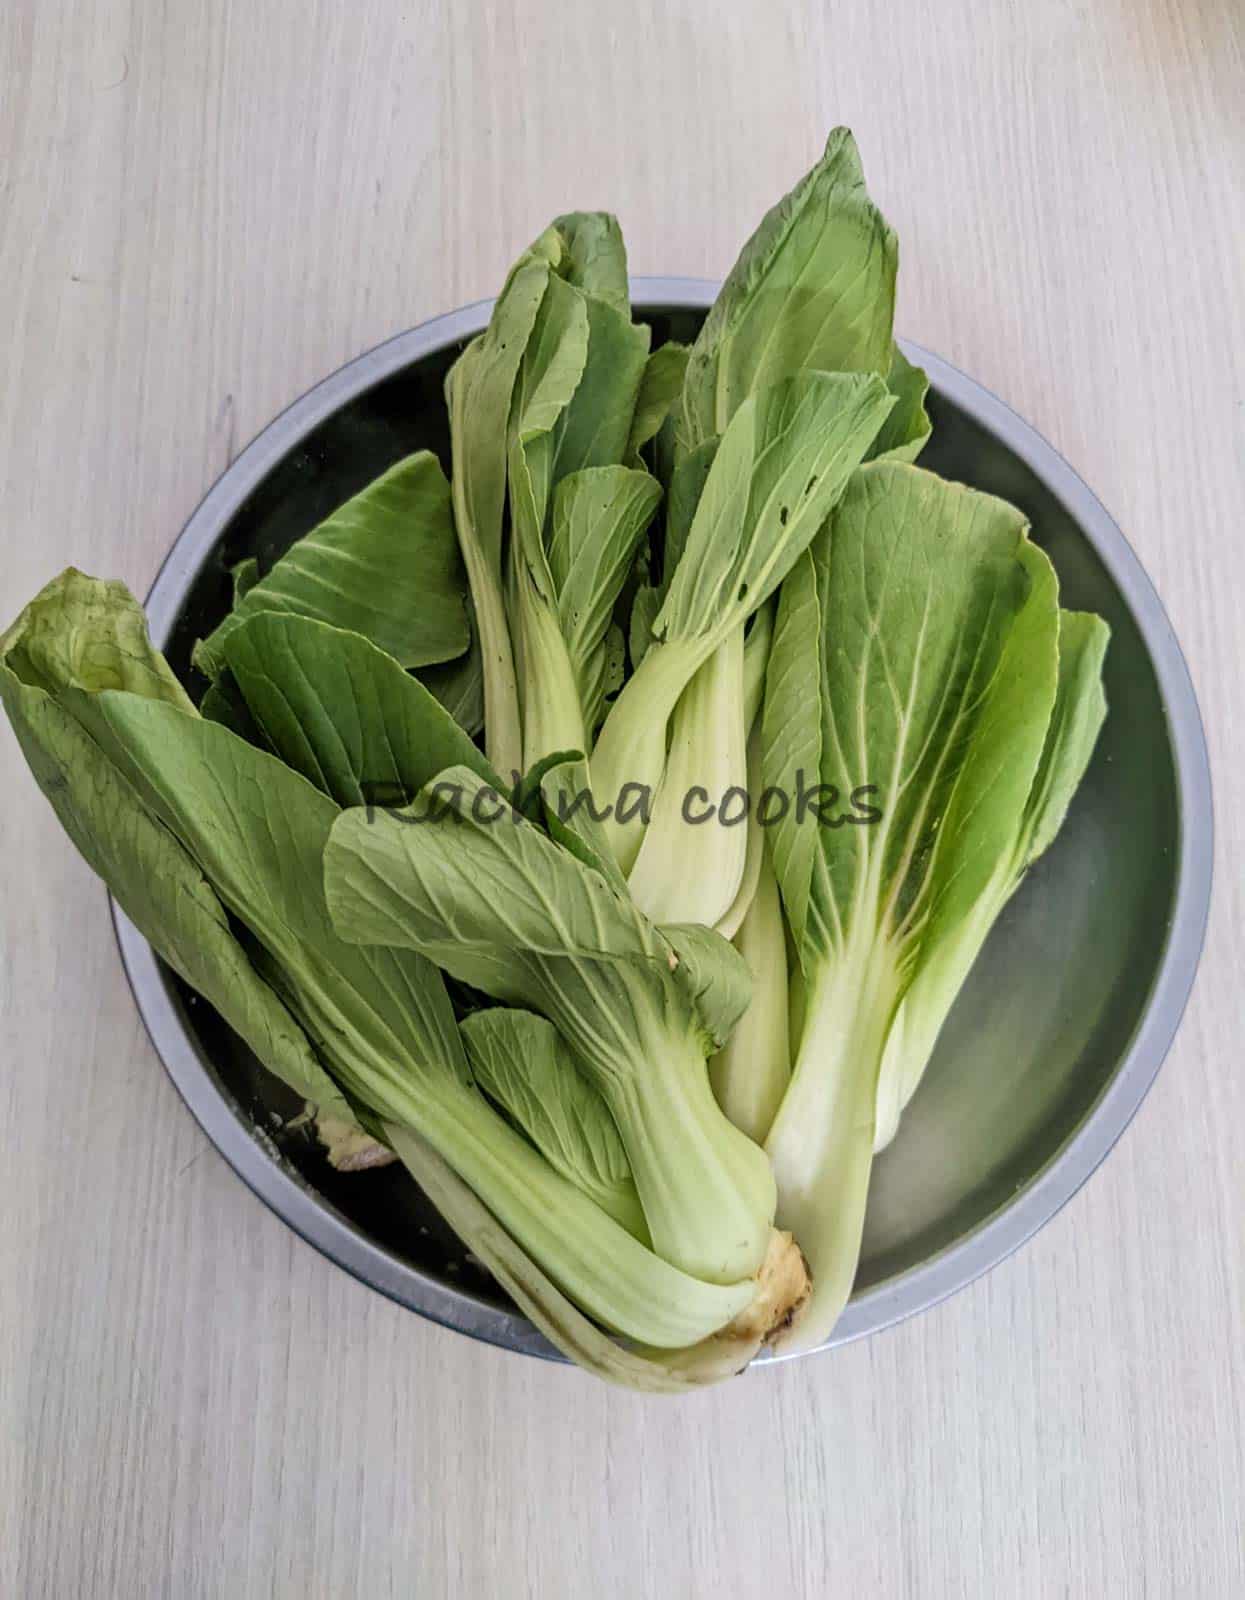 Bok choy in a plate.